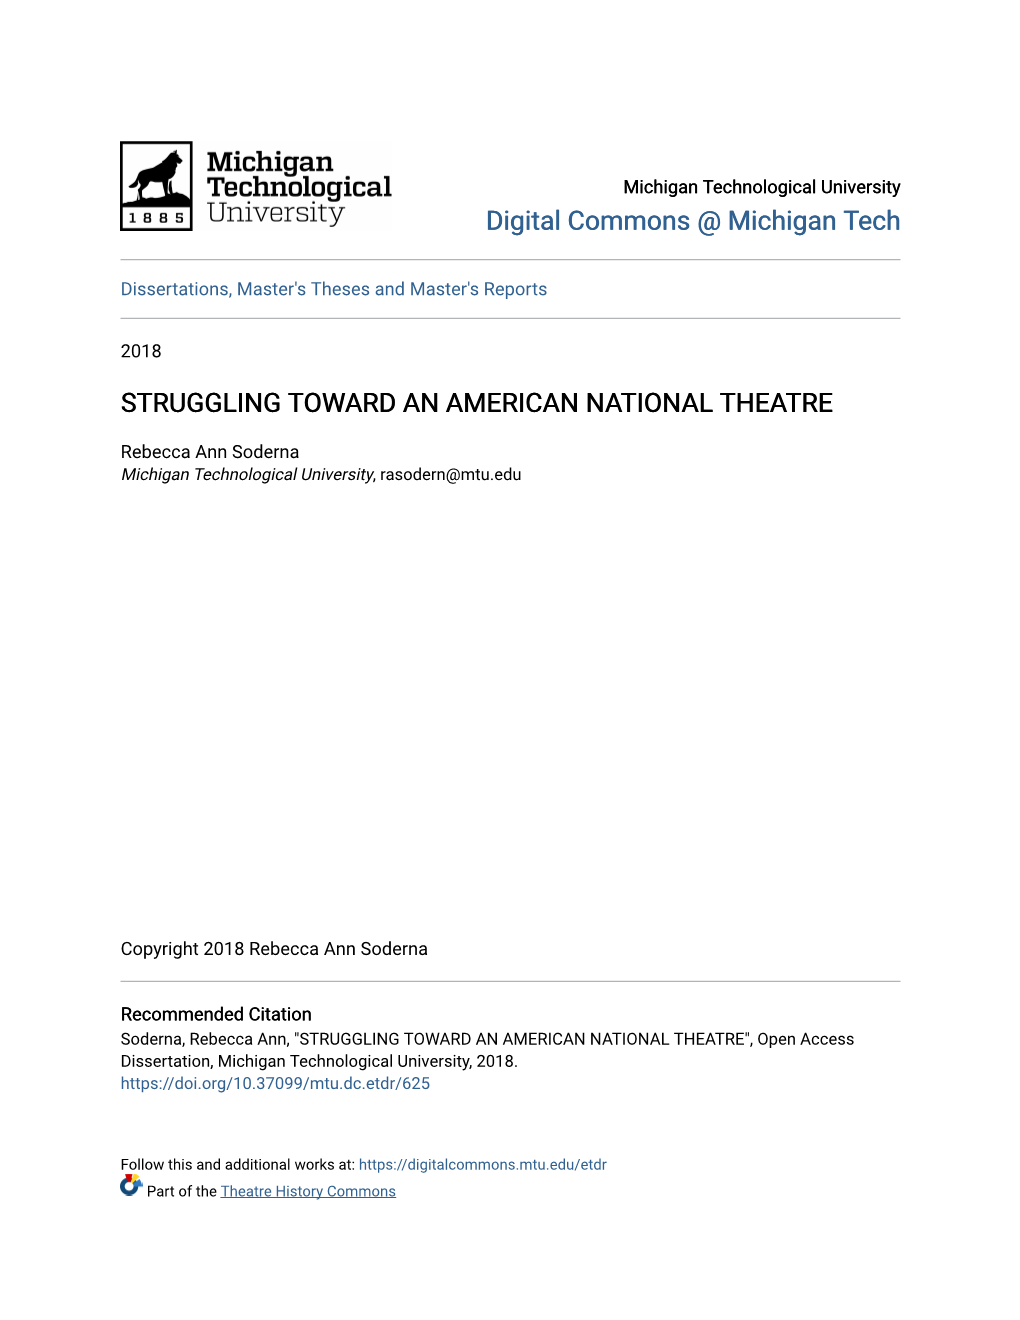 Struggling Toward an American National Theatre